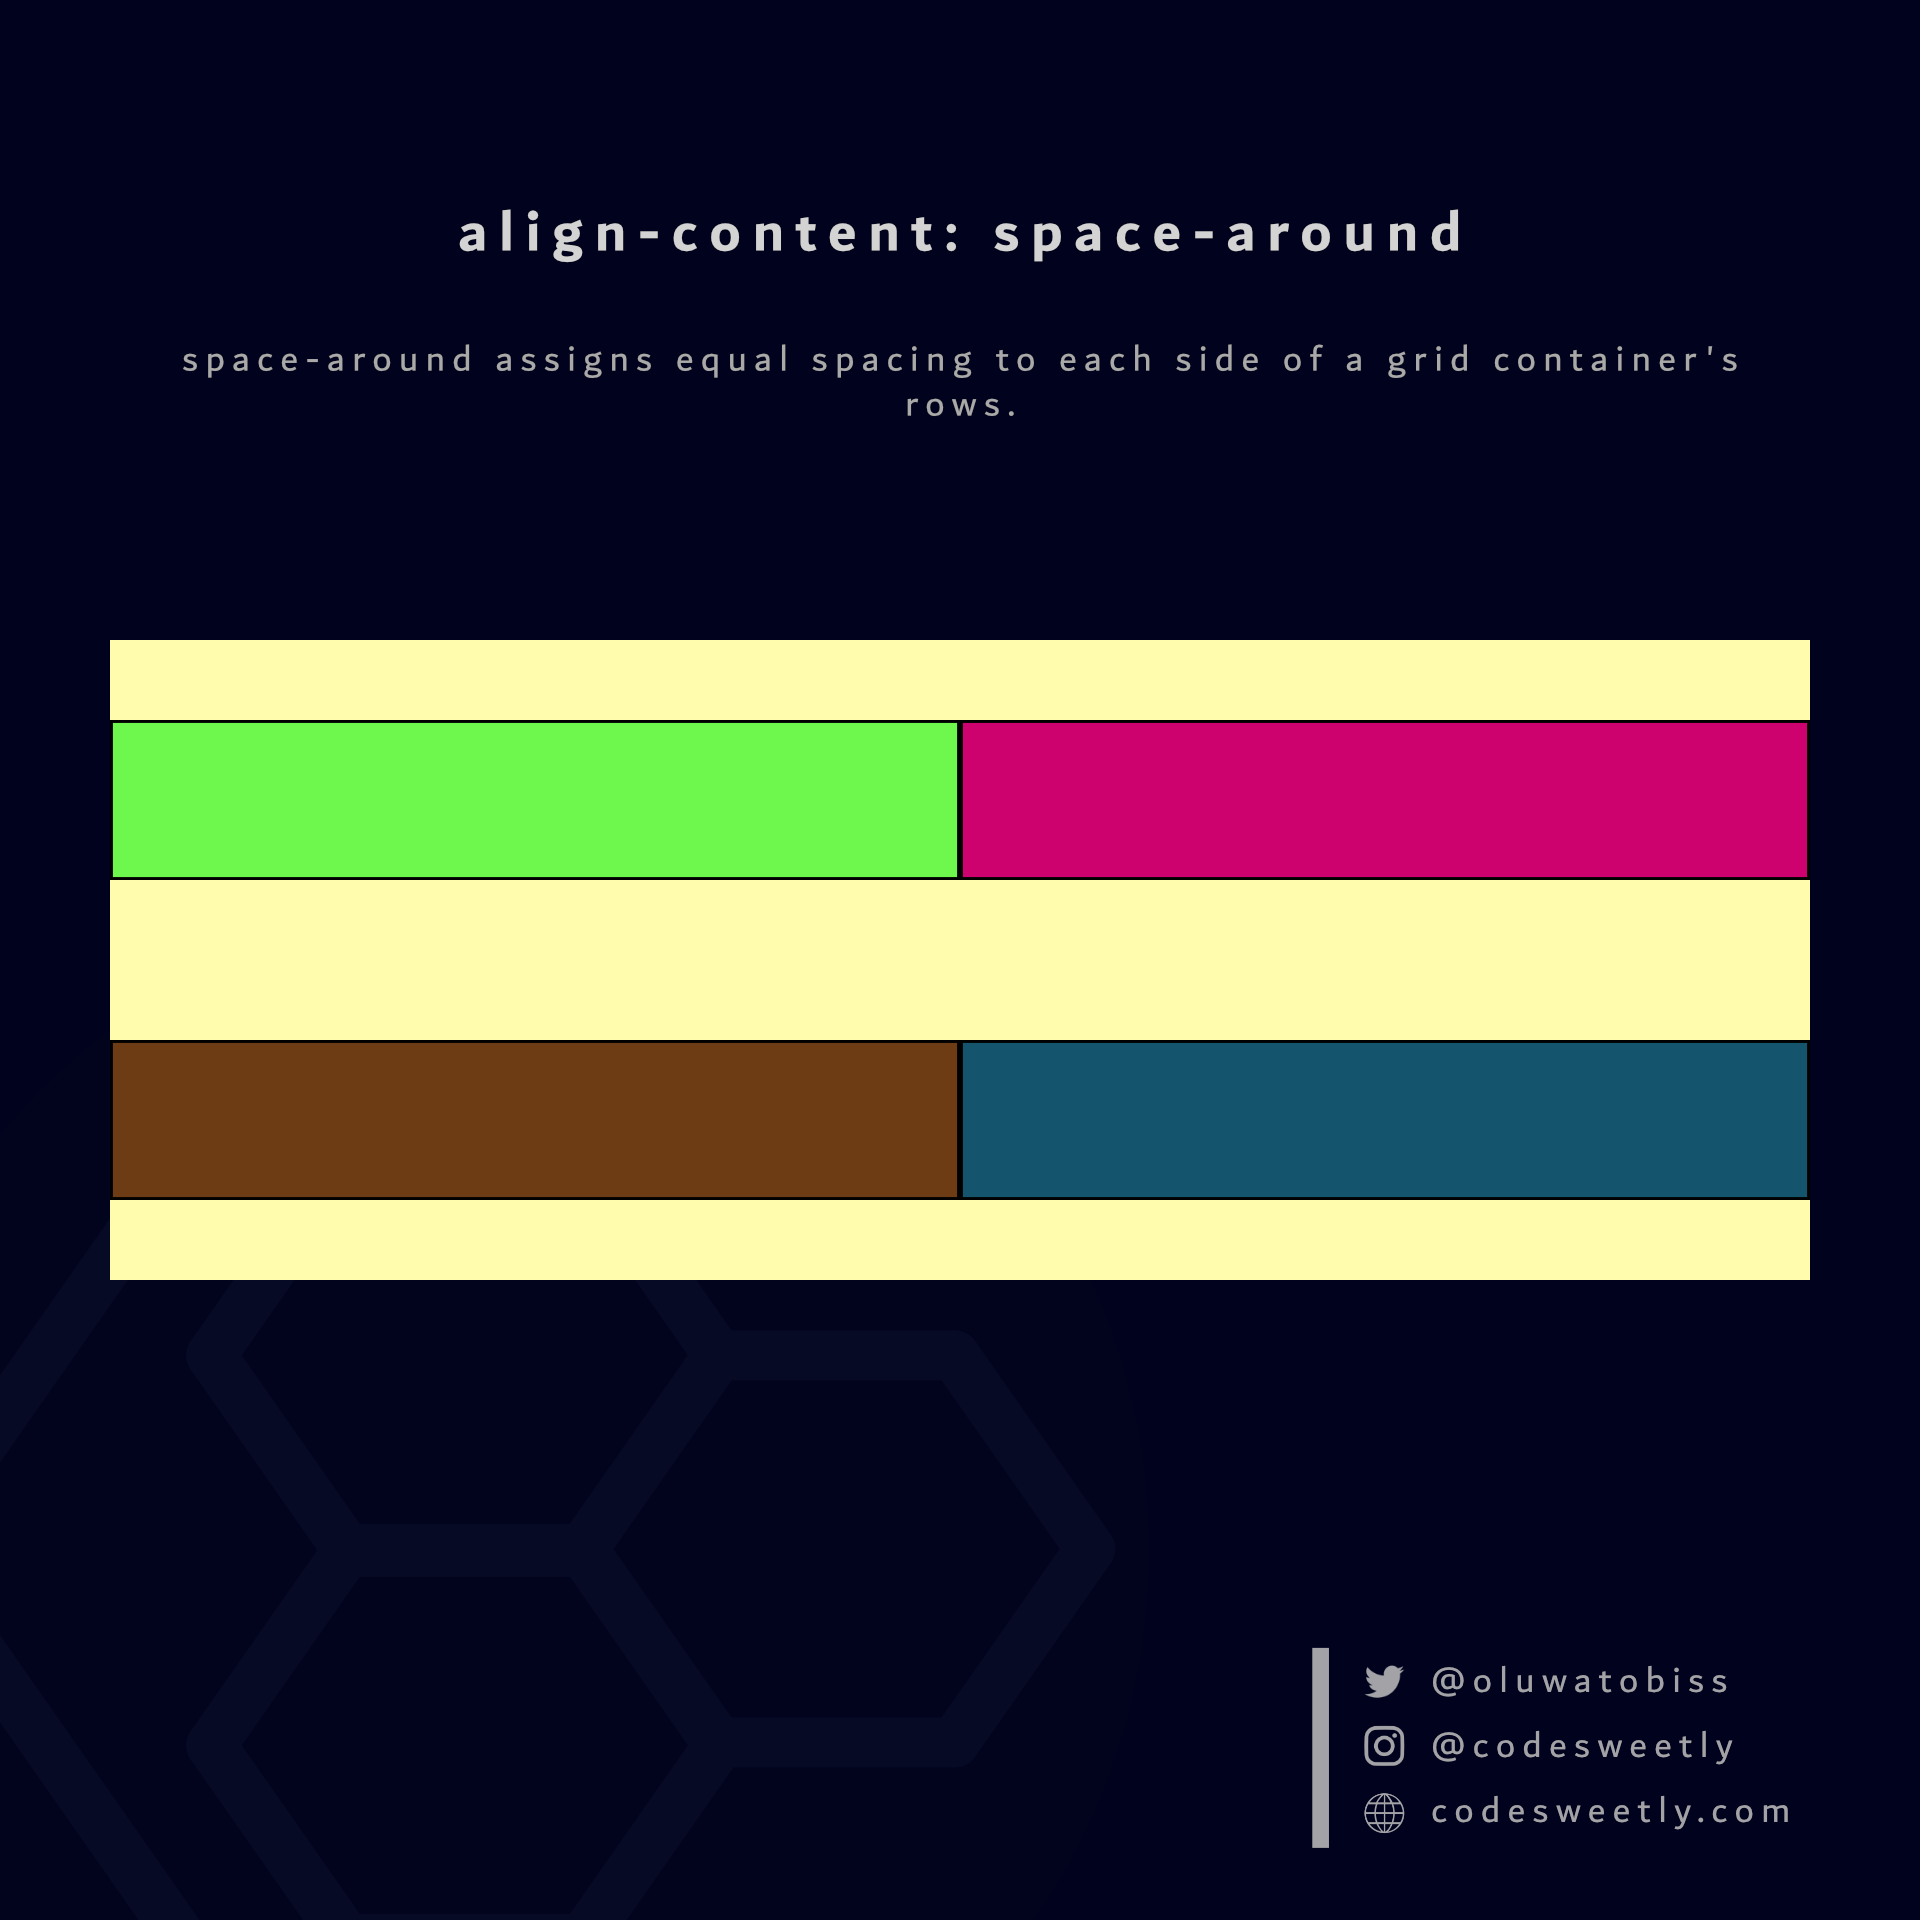 Illustration of align-content's space-around value in CSS Grid